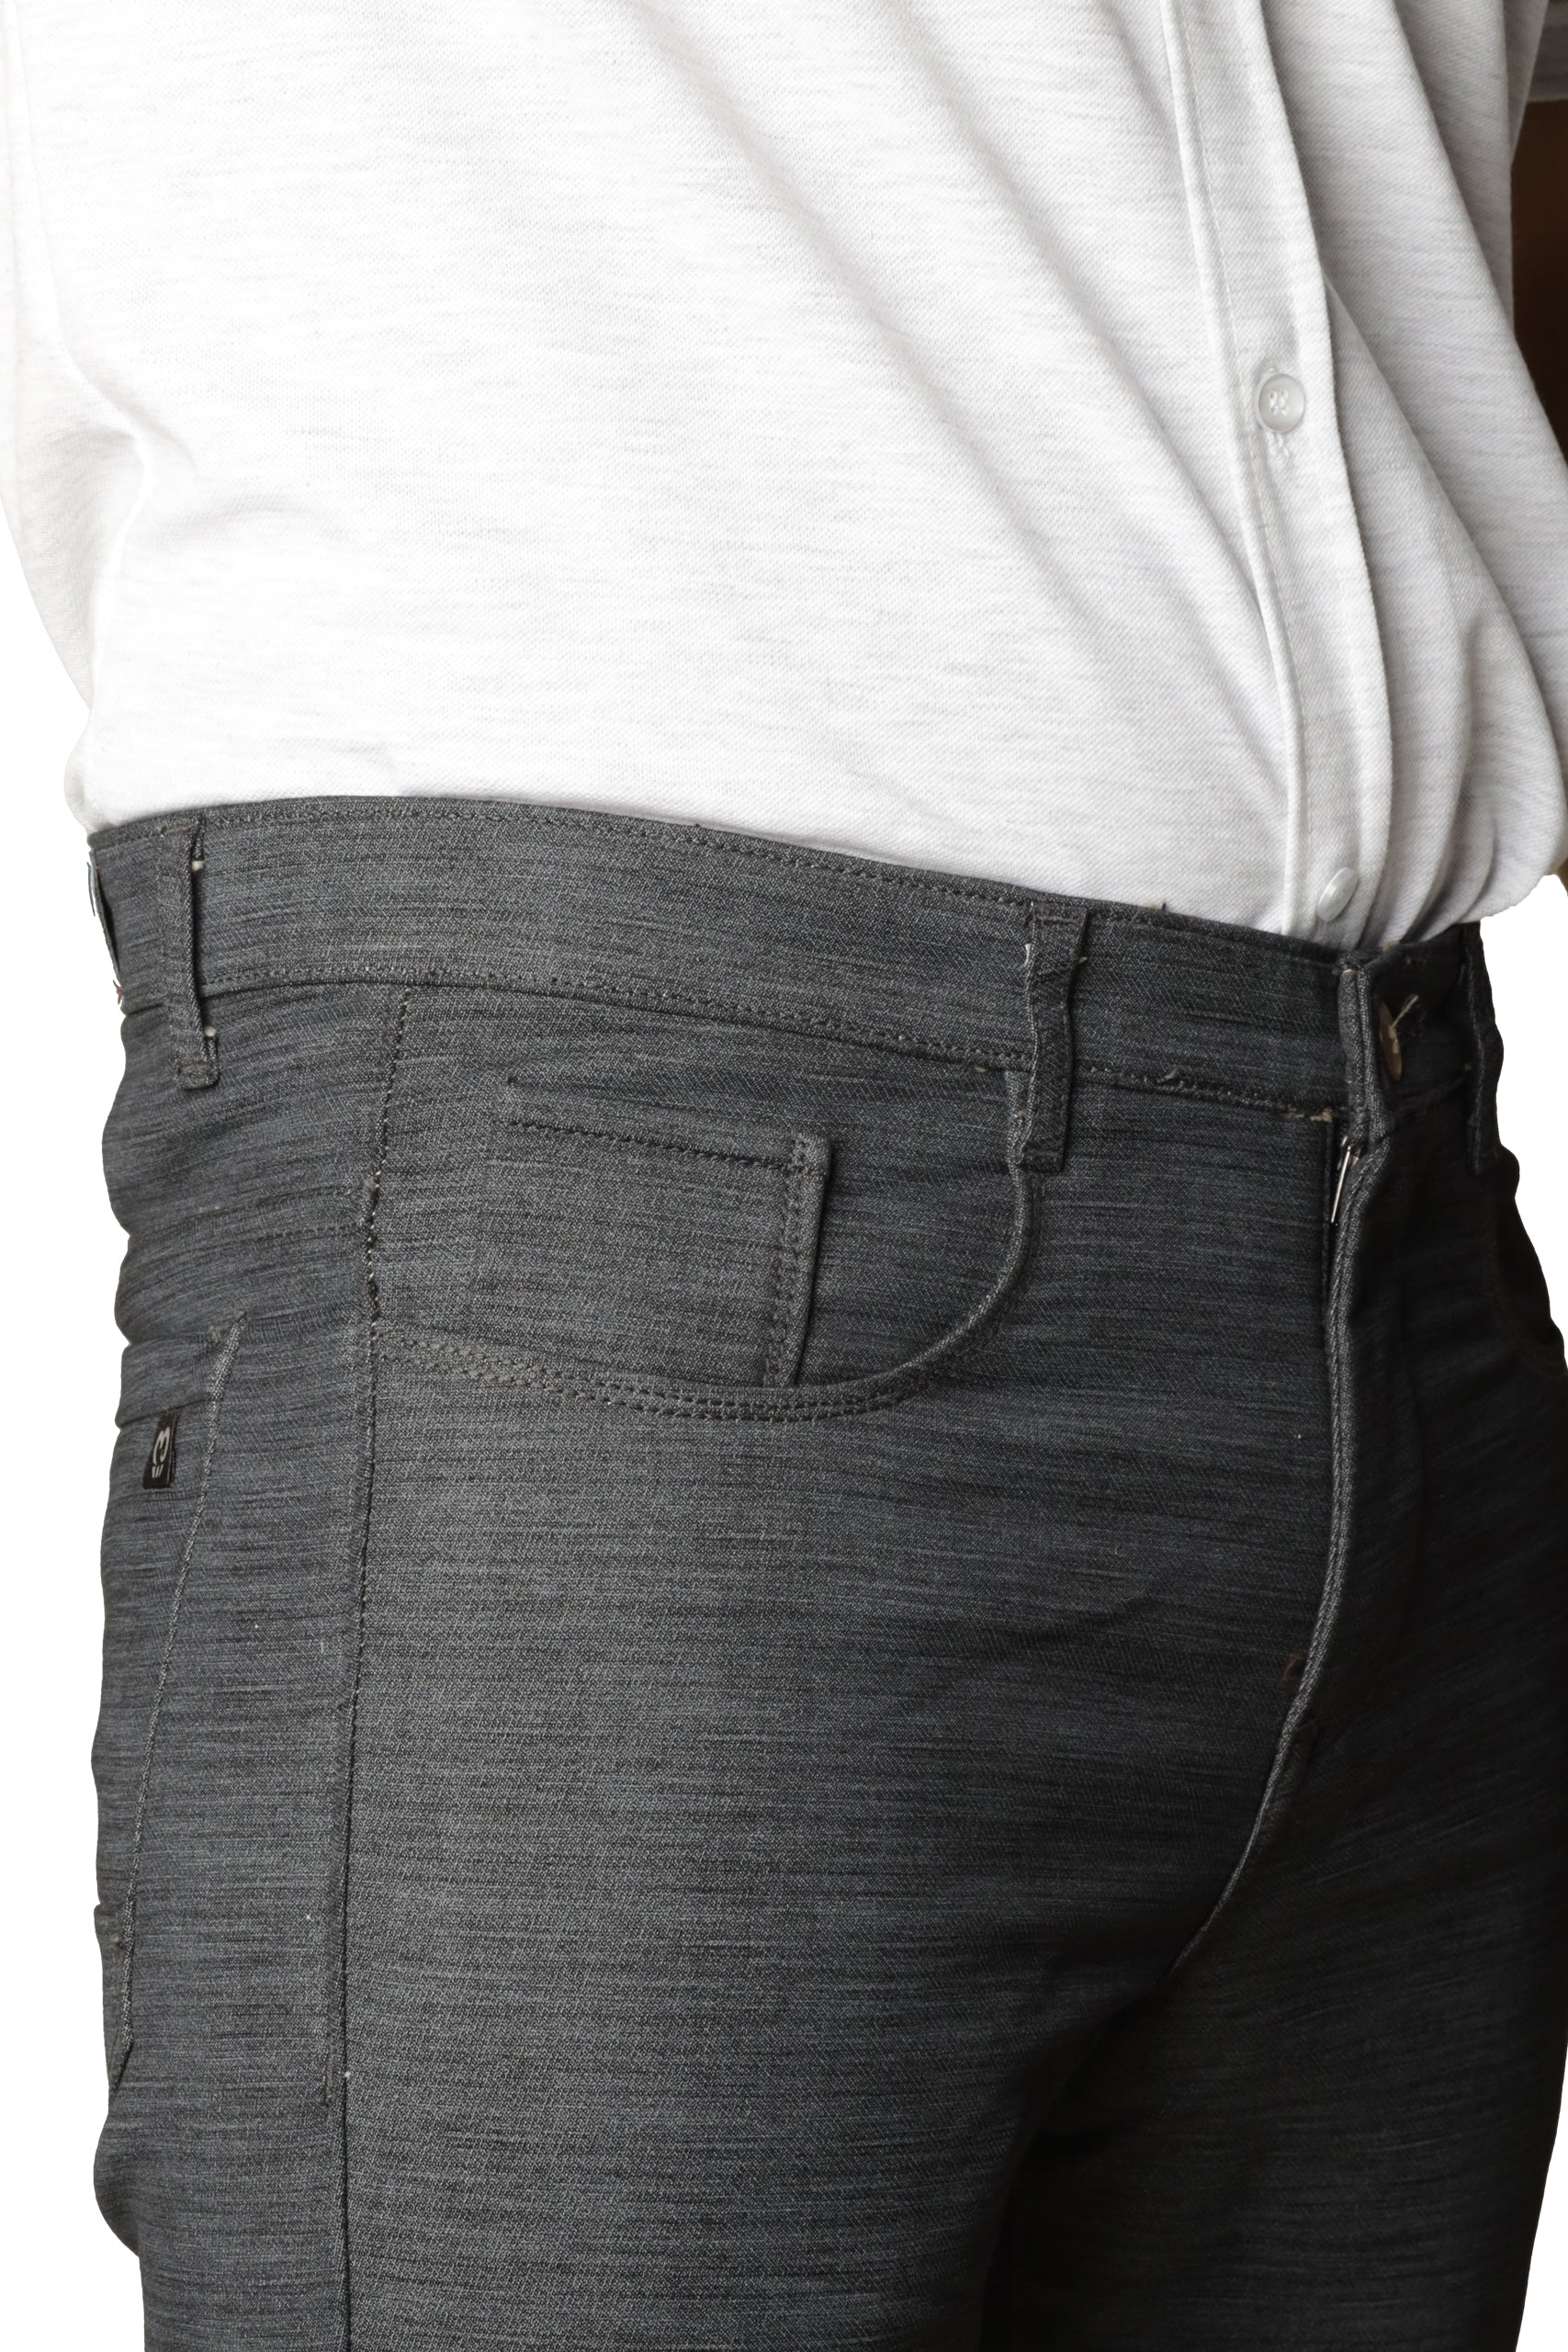 Front Left Side Pocket View of Onyx Black Coloured Printed Denim Jeans at Muffynn Store